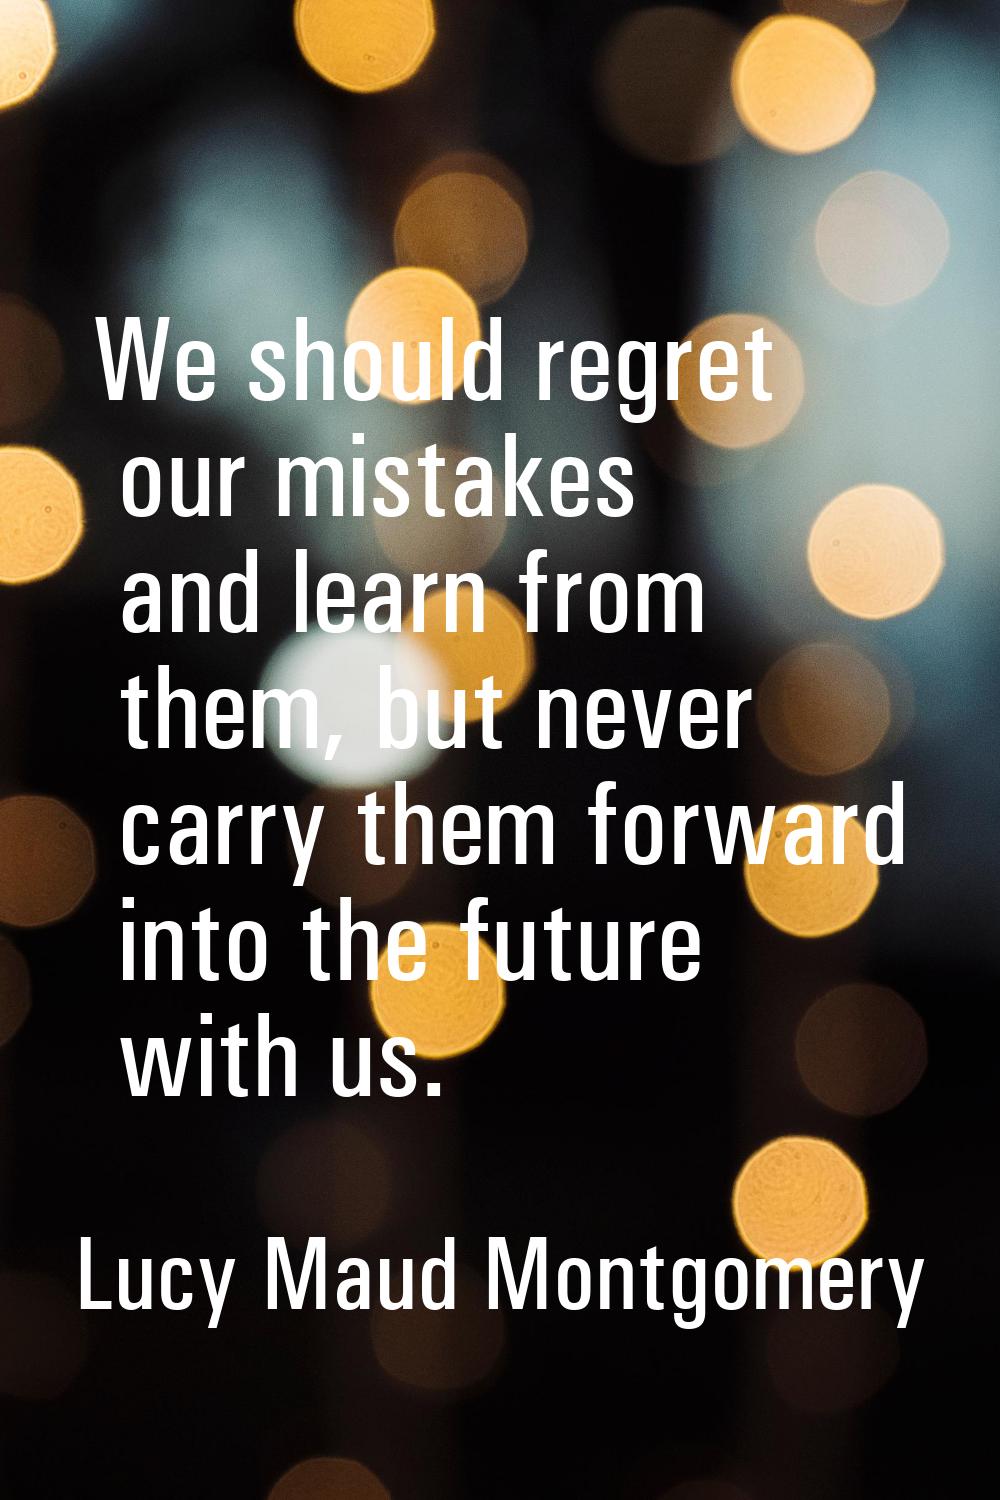 We should regret our mistakes and learn from them, but never carry them forward into the future wit